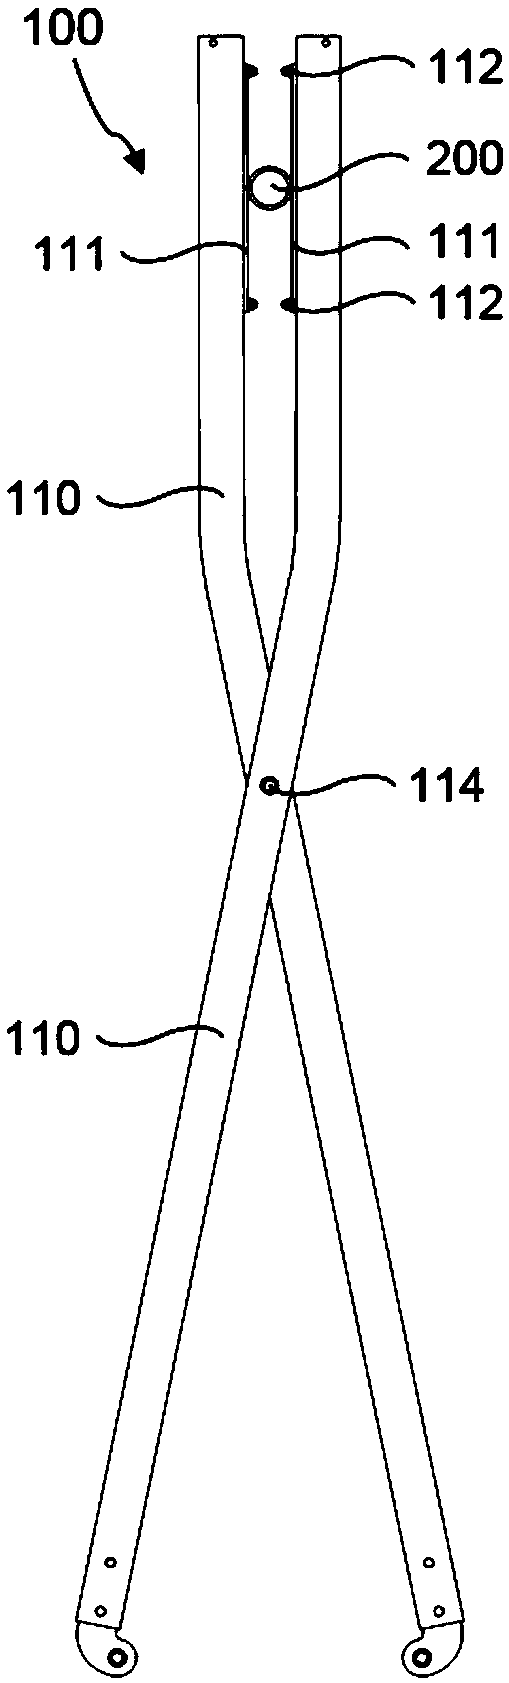 Isolating switch and manufacturing method